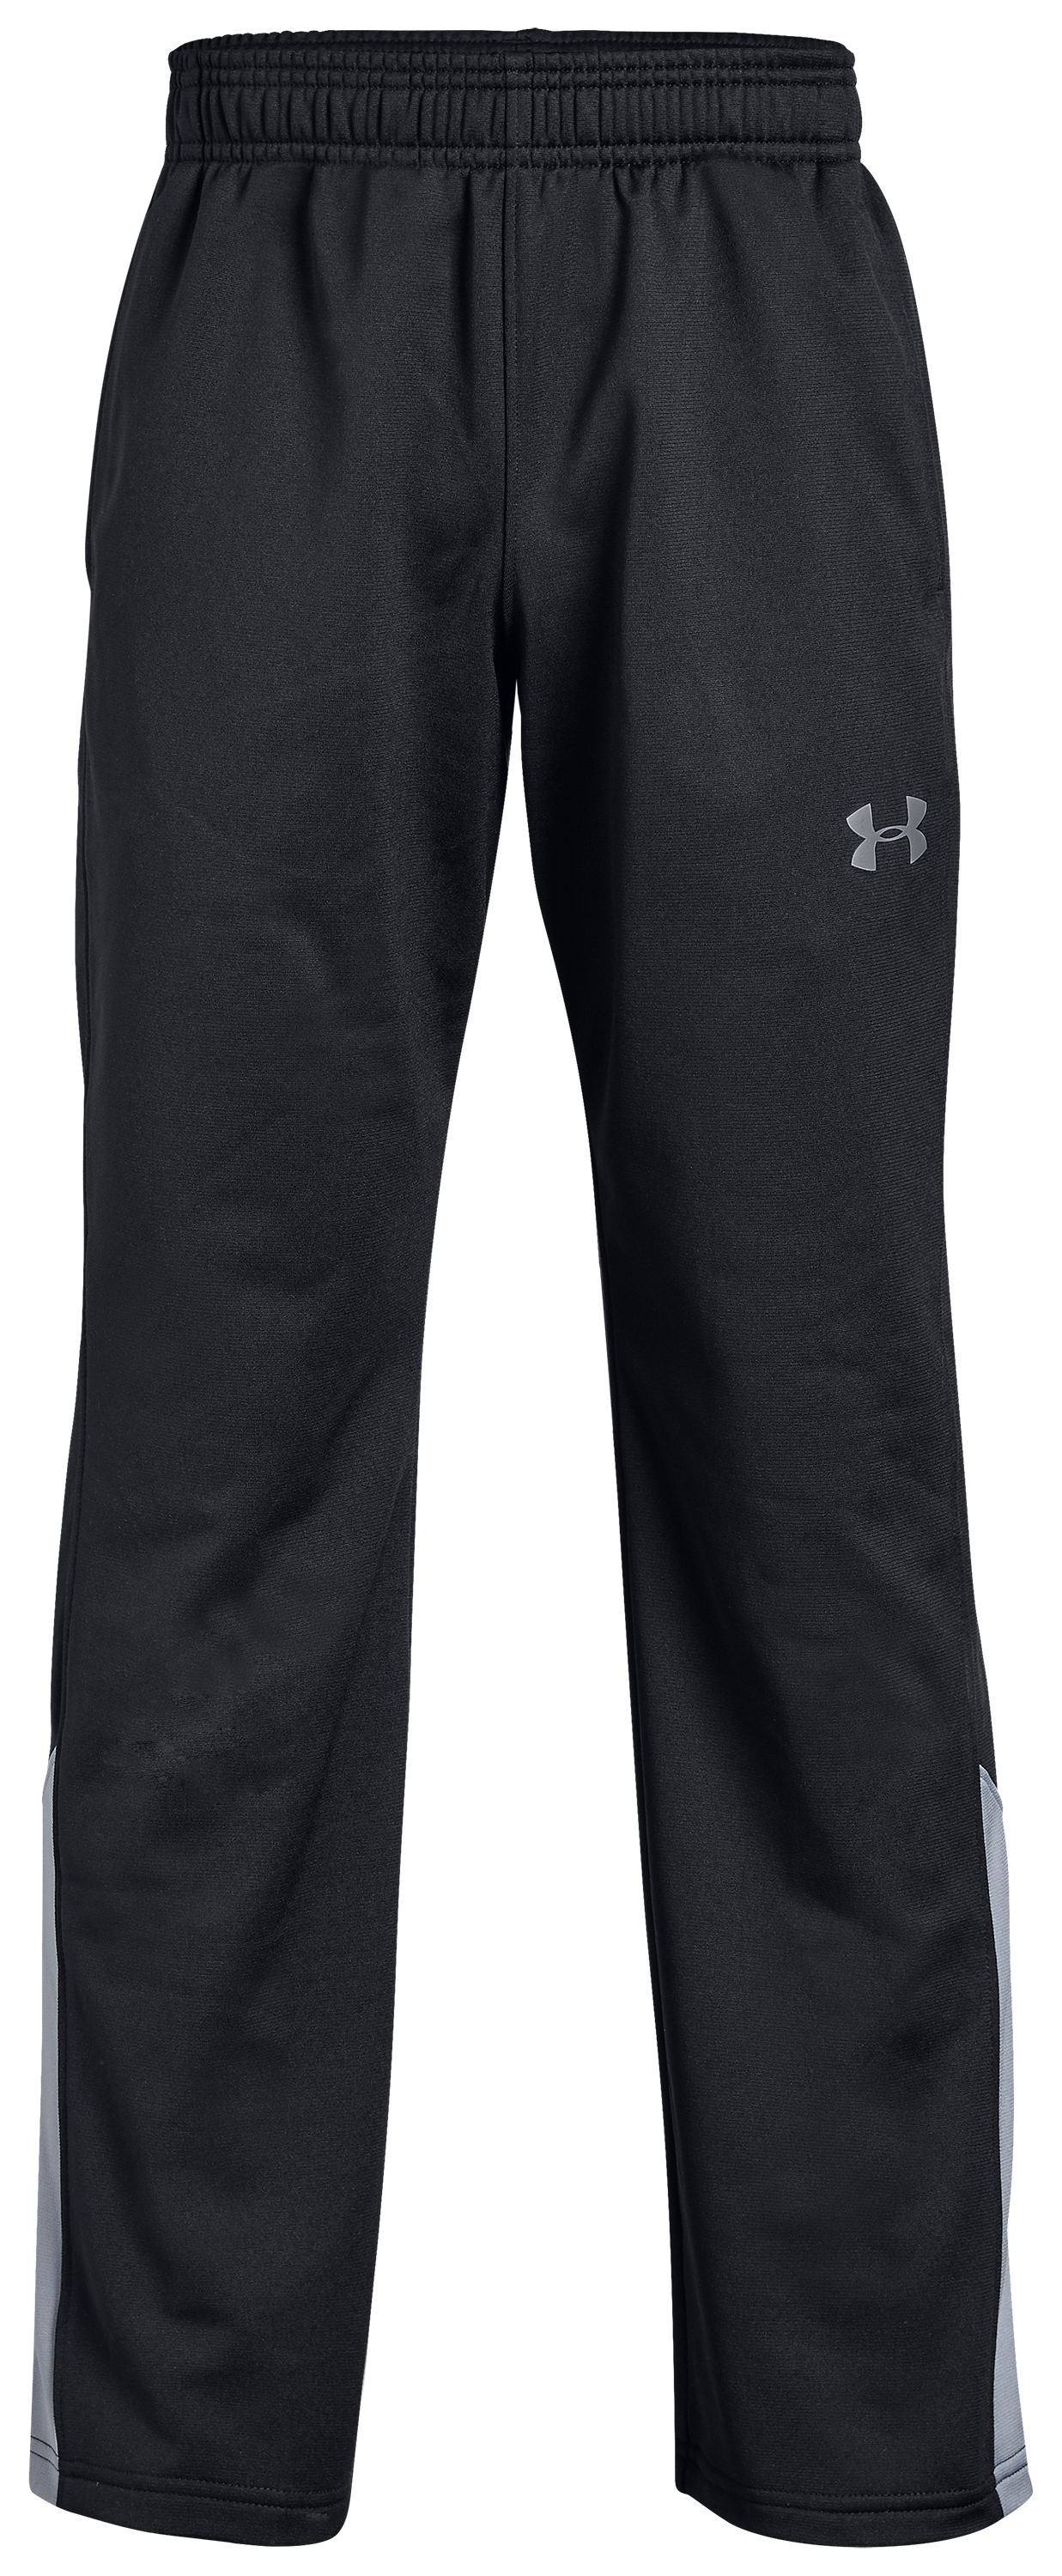 Under Armour Brawler 2.0 Warm-Up Pants for Kids | Bass Pro Shops